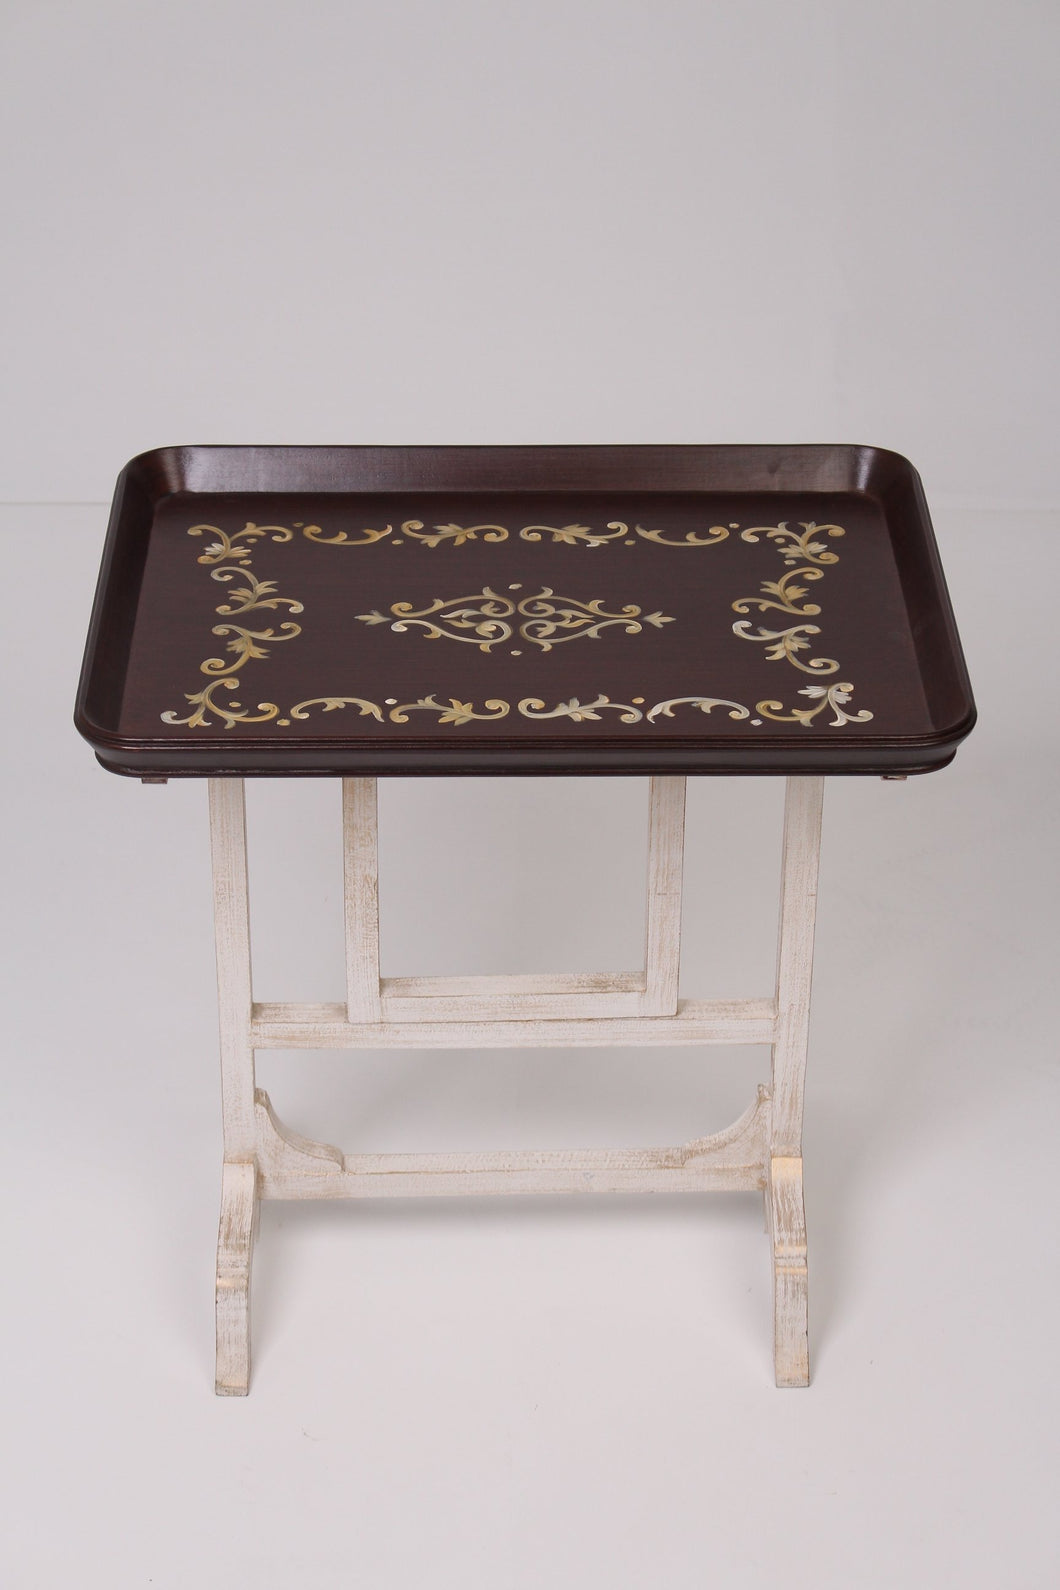 White with gold texture & brown, hand painted table 2' x 2.5ft - GS Productions